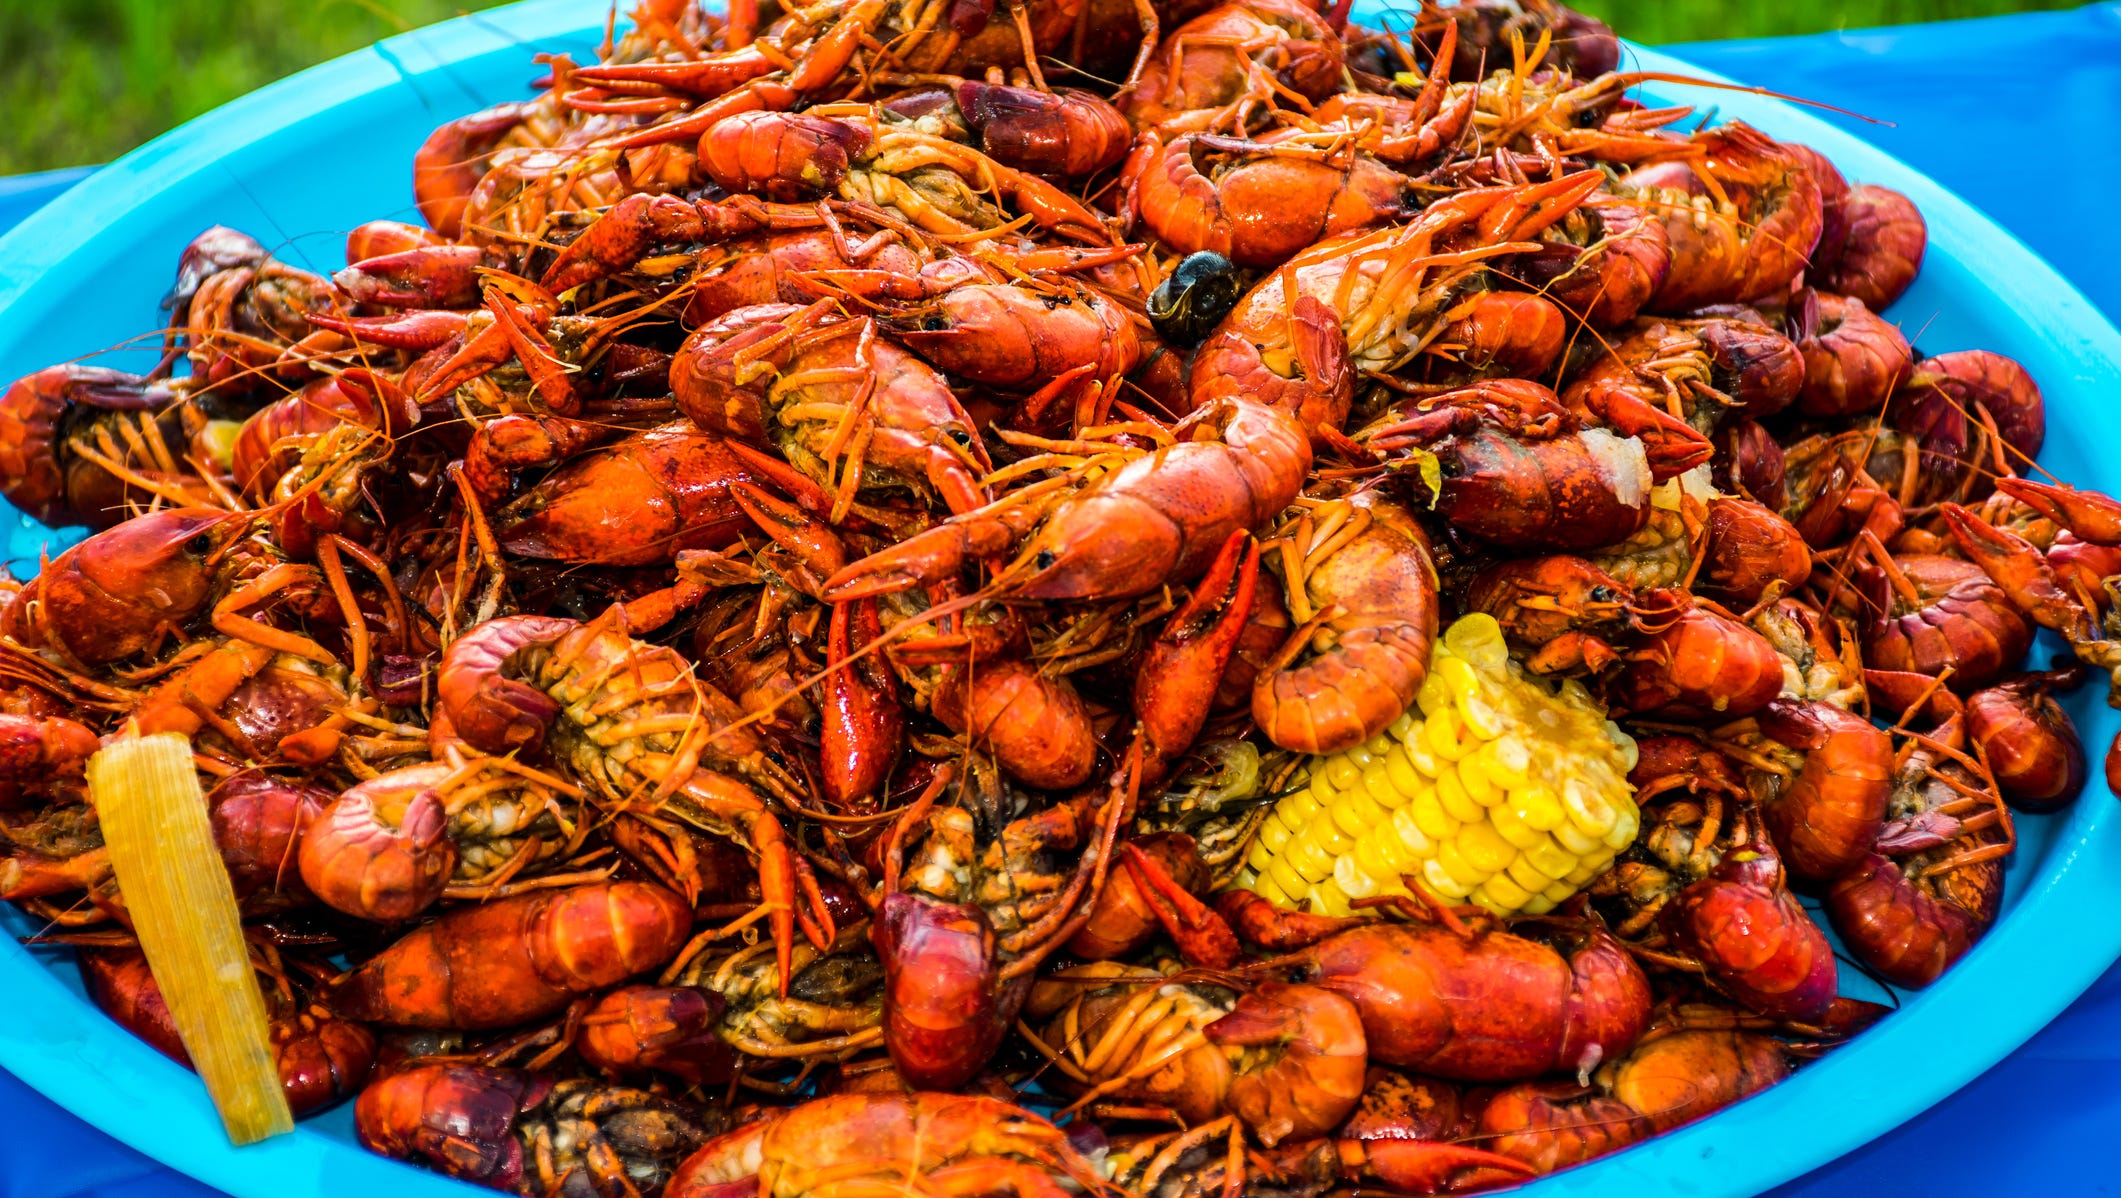 win-a-crawfish-boil-on-us